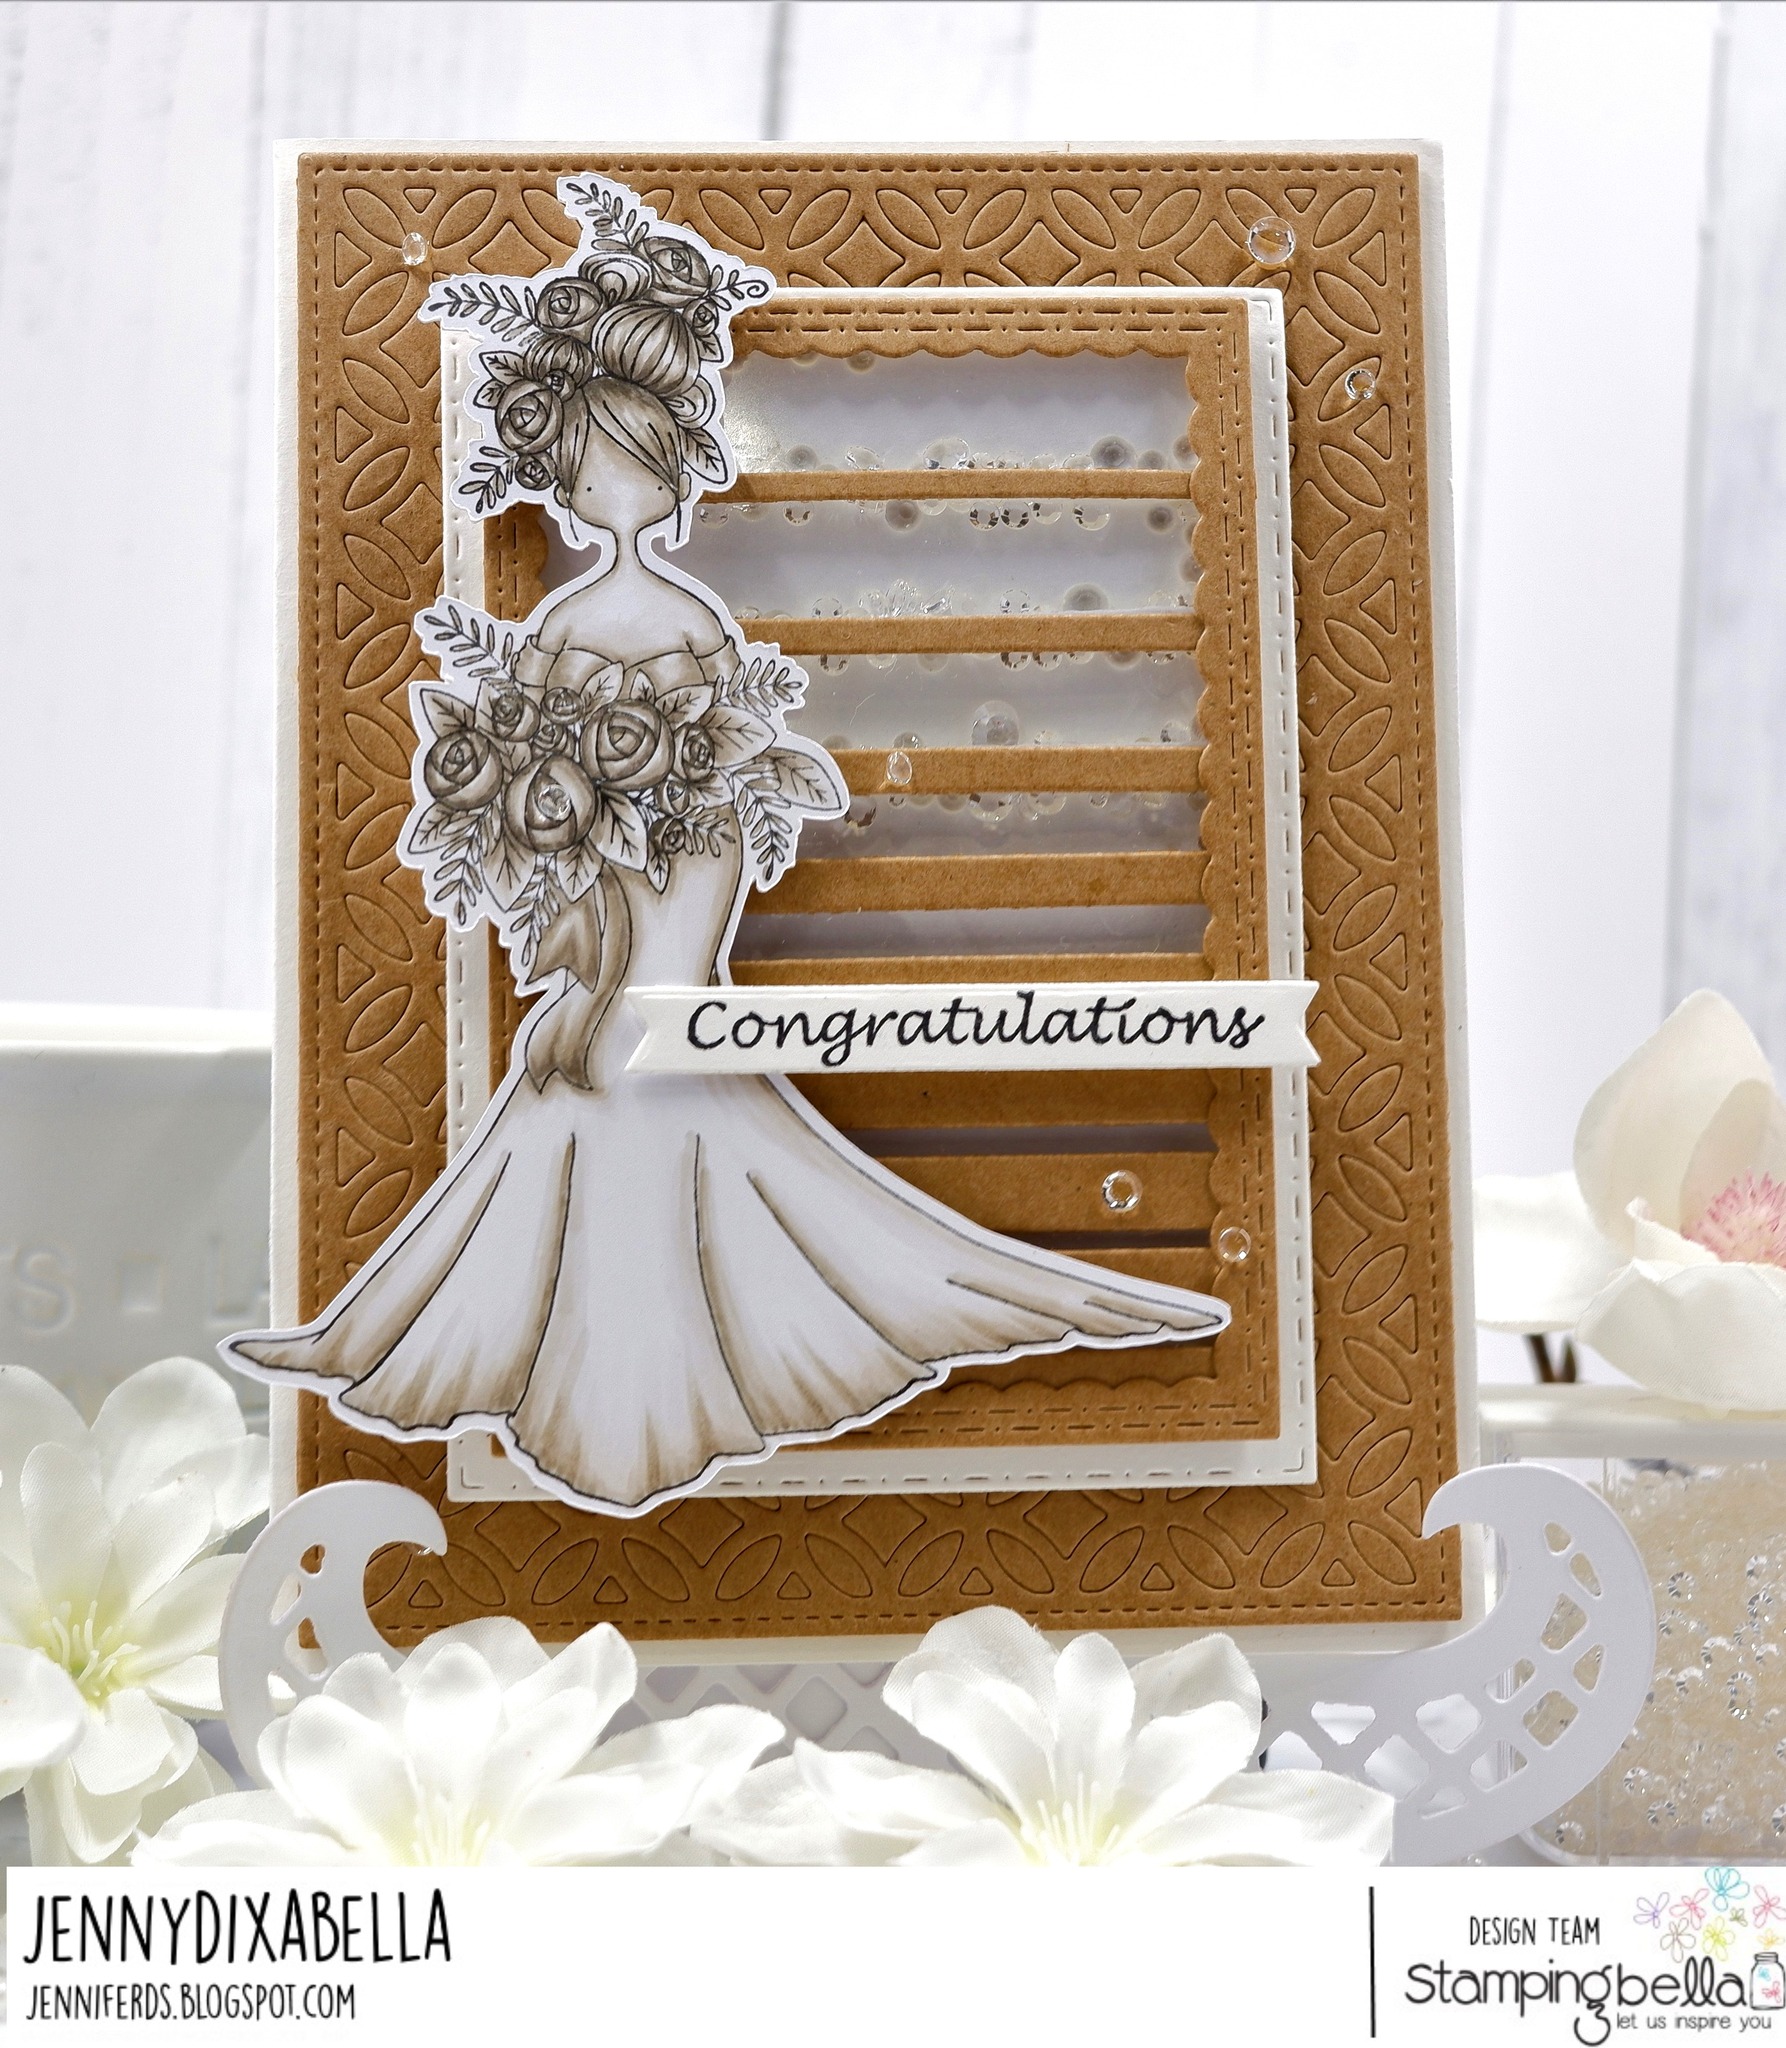 www.stampingbella.com: rubber stamp used: CURVY GIRL BRIDE  card by Jenny Dix